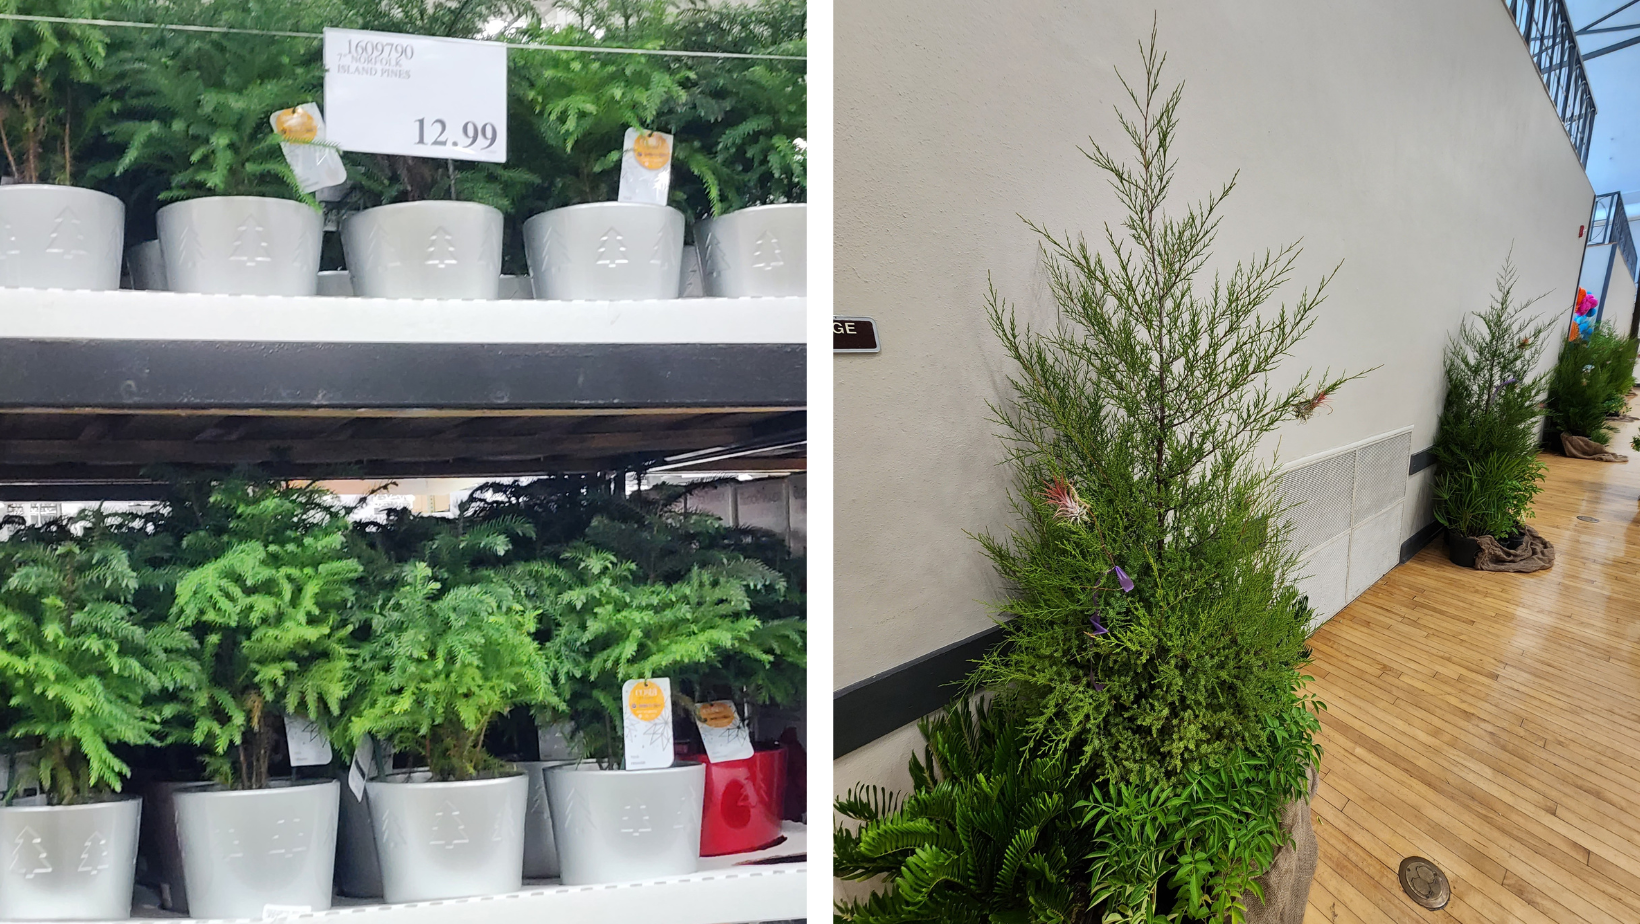 'Norfolk Island' Pines being sold locally compared to tastefully decorated Red Cedars at the 2023 Green Living Expo